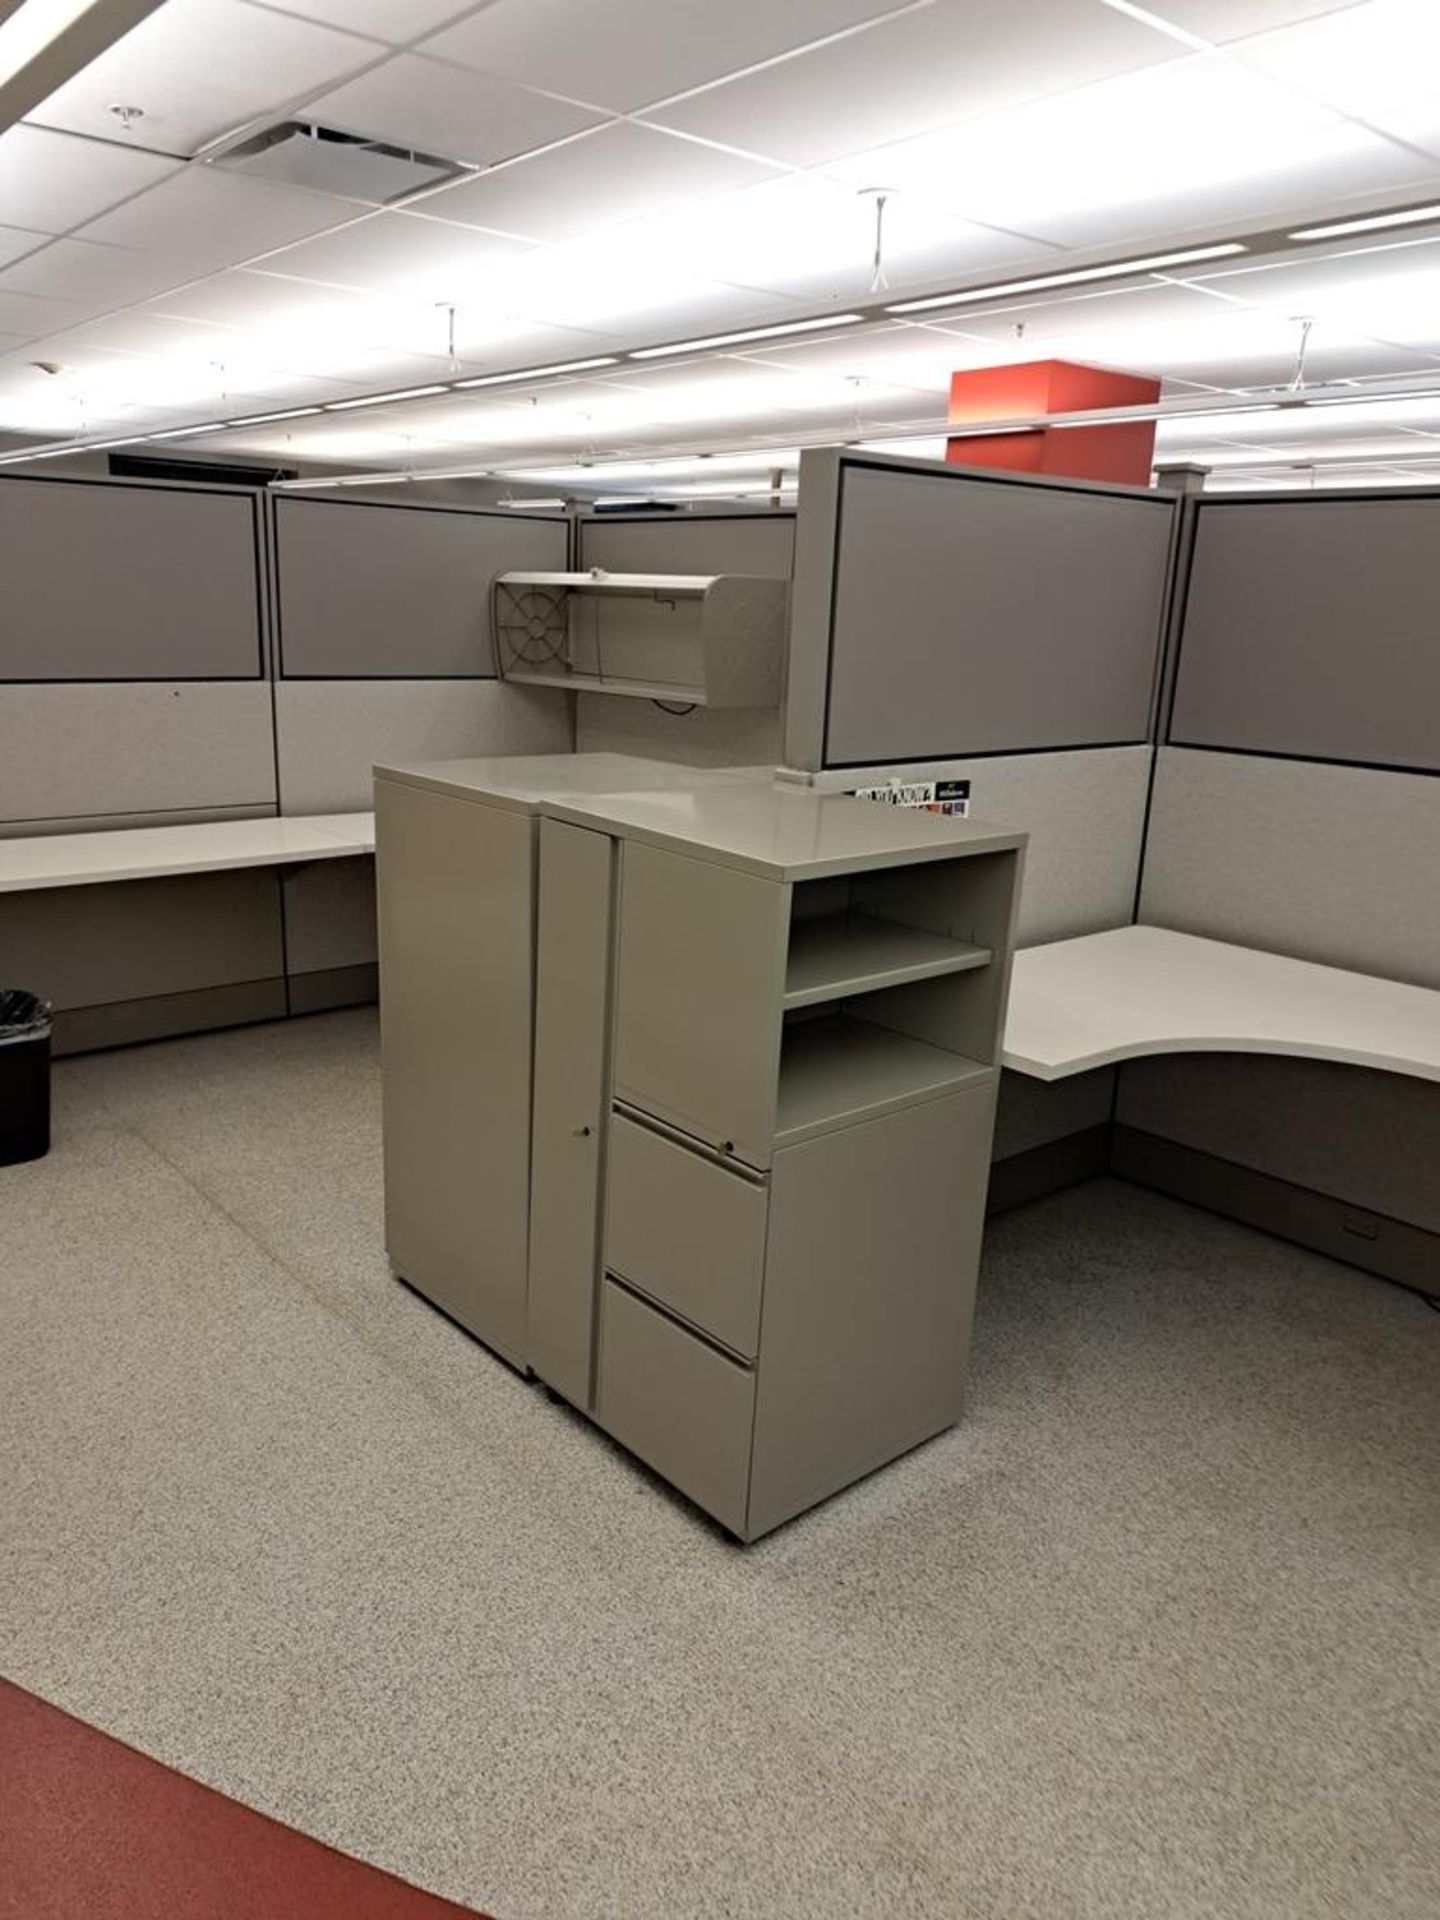 Herman Miller Cubicle Work Stations, 17' W X 50' L, (2) Work Stations per section, (12) Sections, - Image 8 of 25